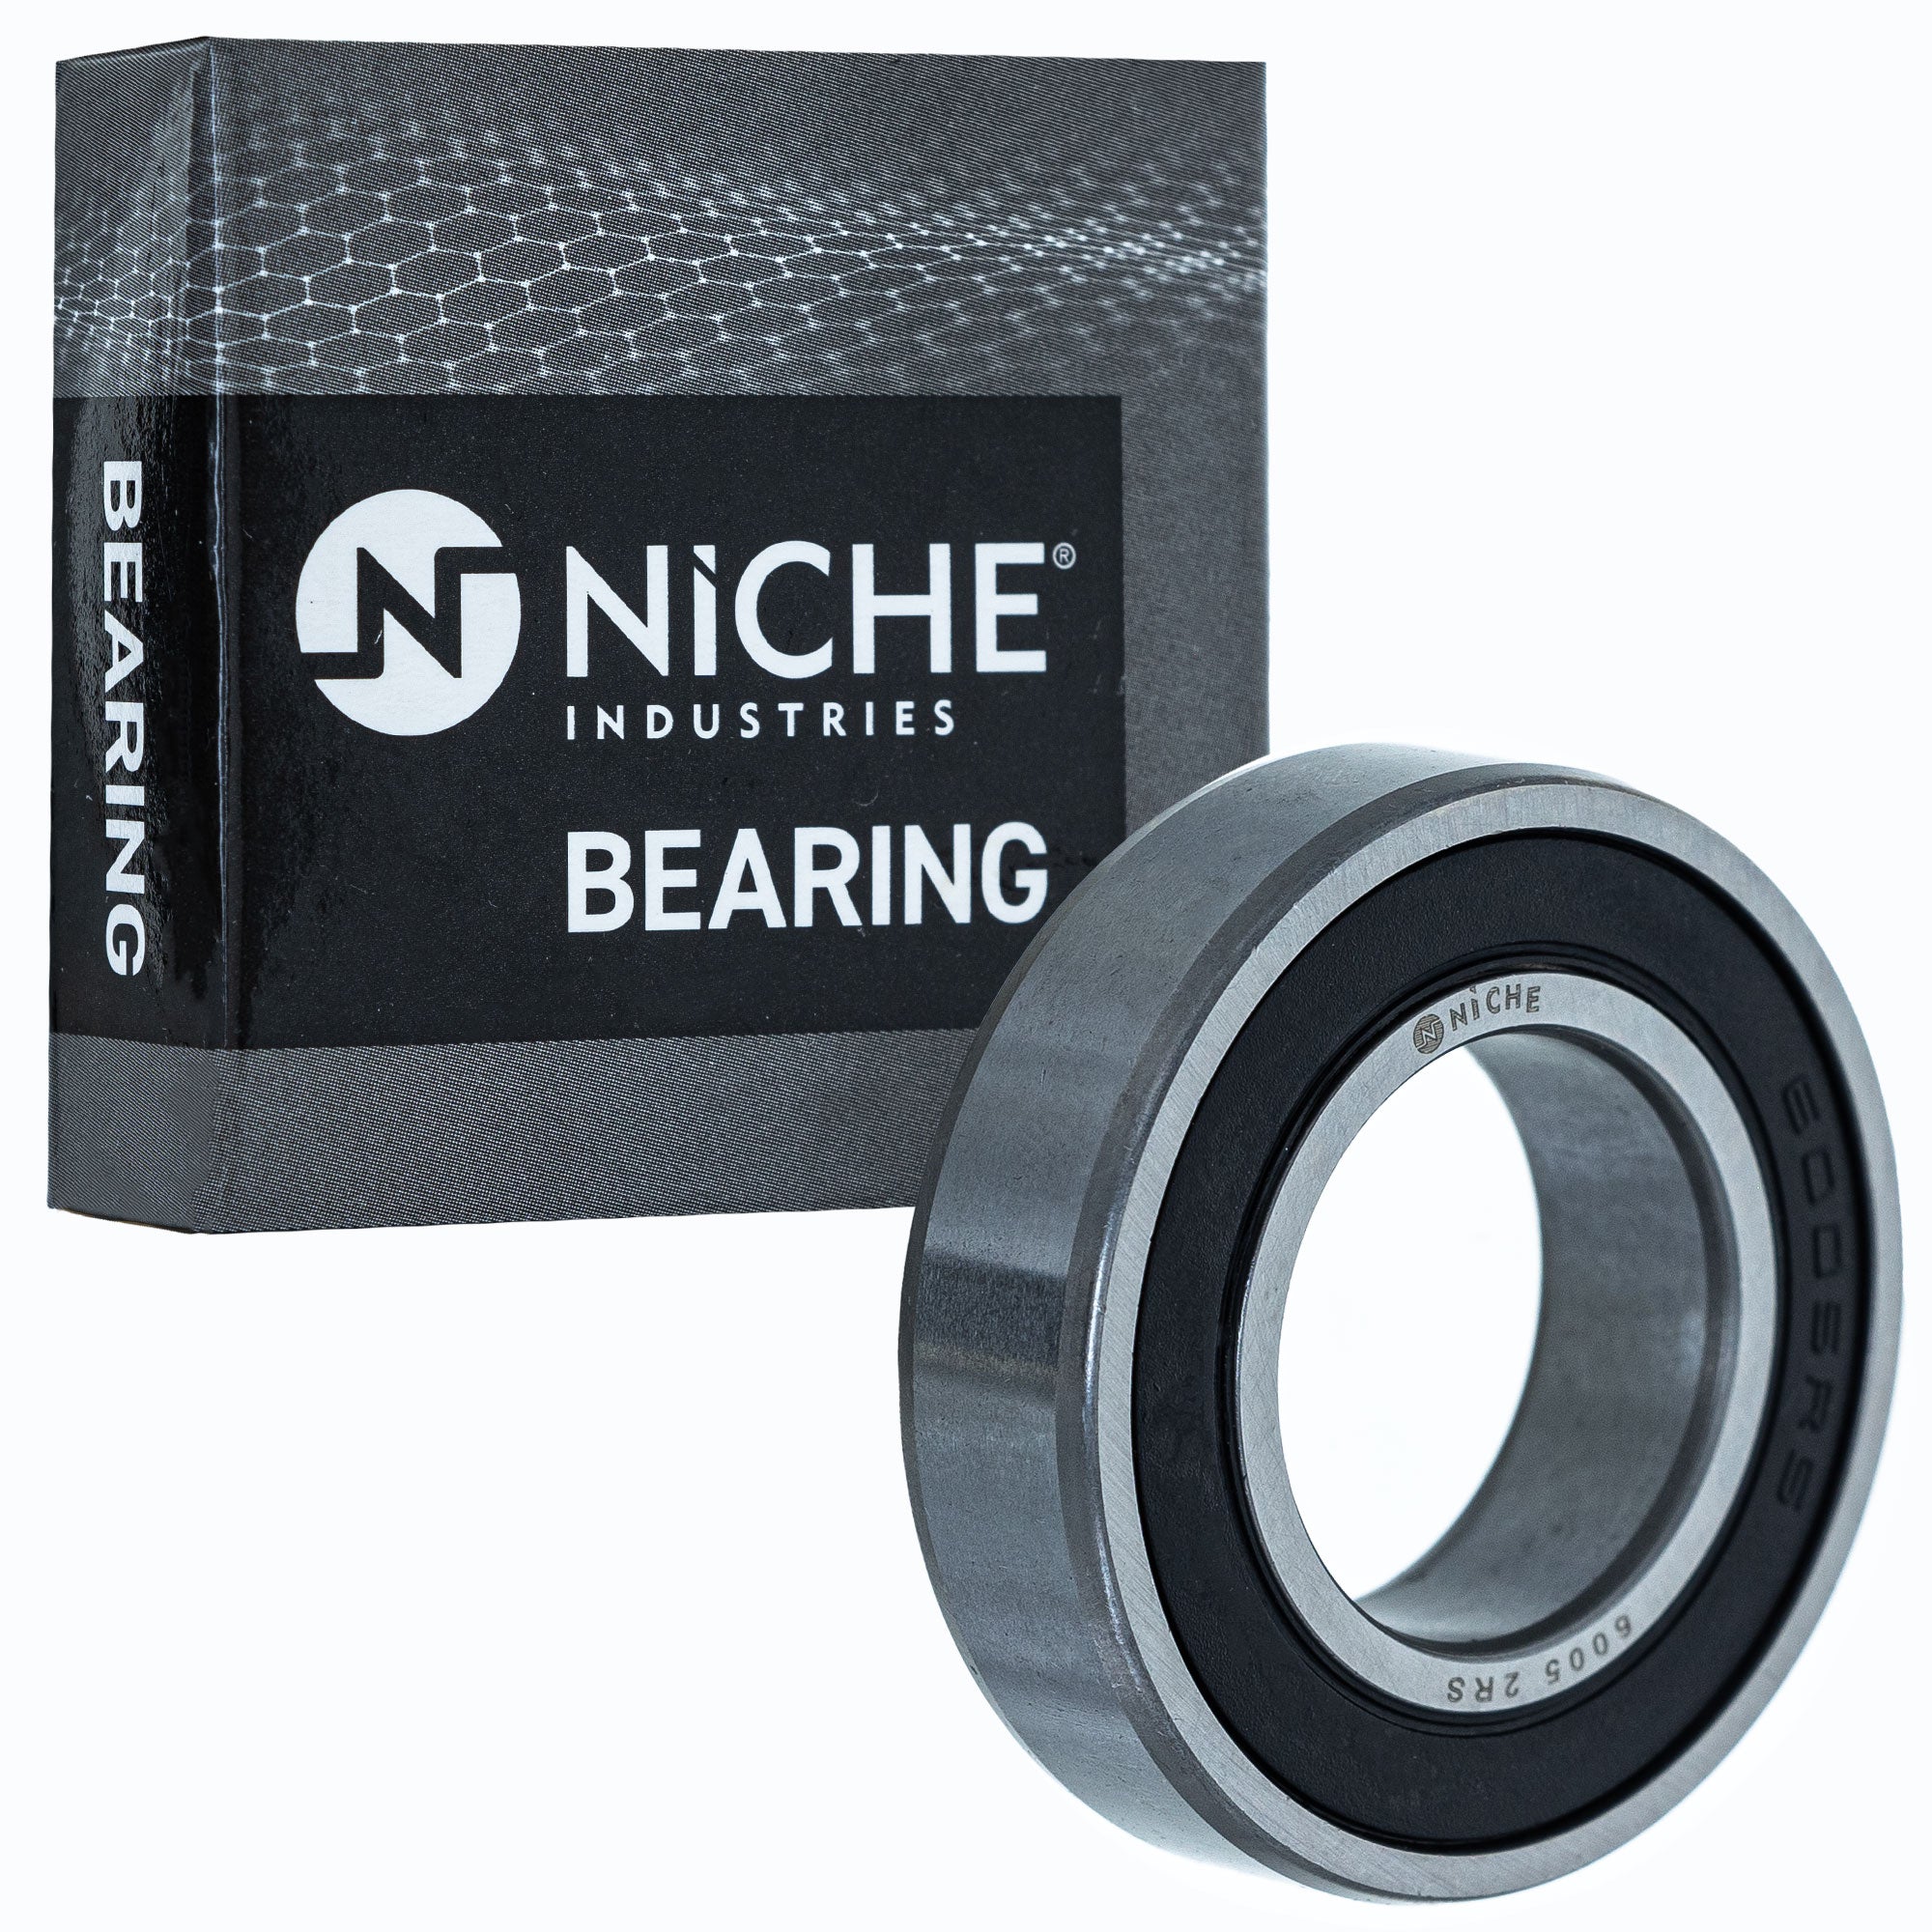 NICHE 519-CBB2234R Bearing 10-Pack for zOTHER RVT1000R RC51 Rancher